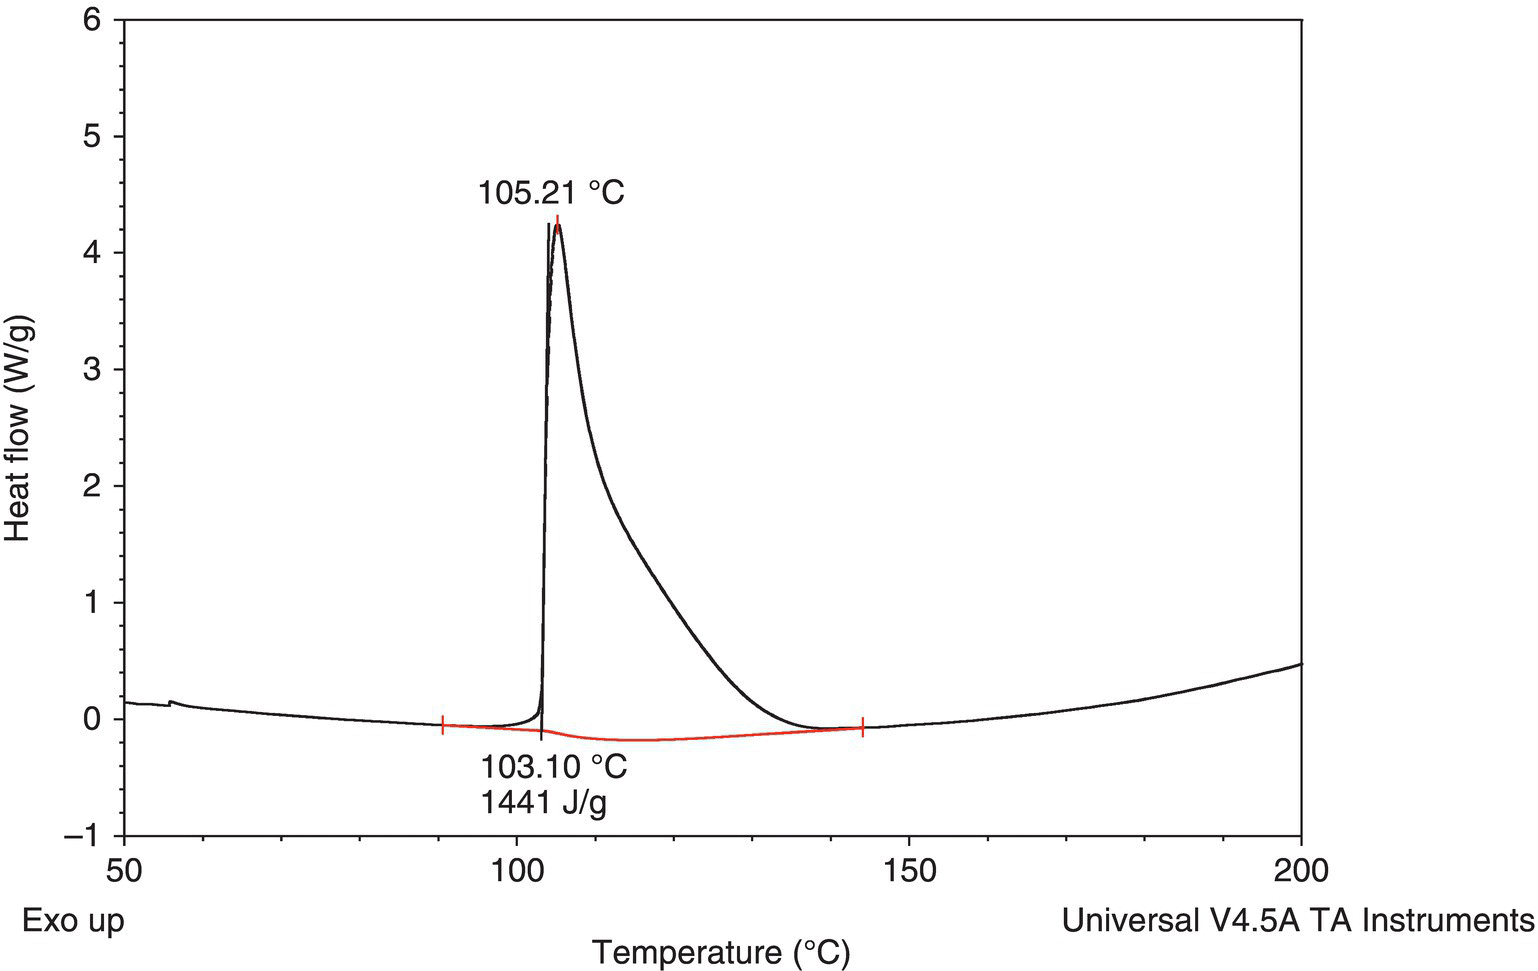 Graph of decomposition of 98% benzoyl peroxide, displaying an ascending–descending curve with peak at 105.21 °C. Below the curve are labels 103.10 °C and 1441 J/g.